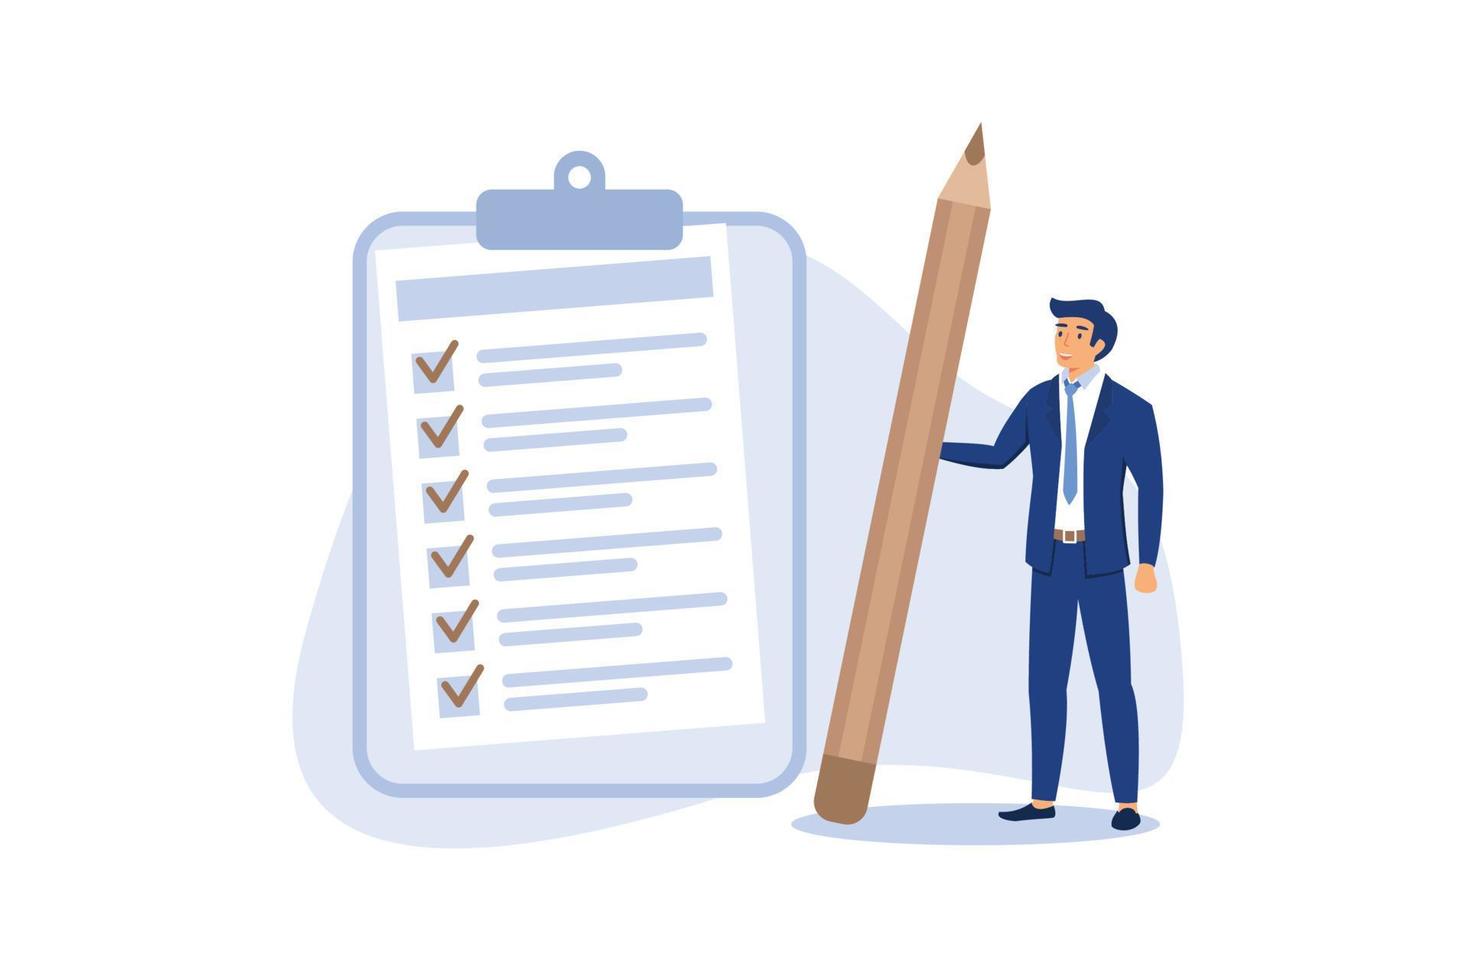 Checklist for work completion, review plan, business strategy or todo list for responsibility and achievement concept, confident businessman standing with pencil after completed all tasks checklist. vector